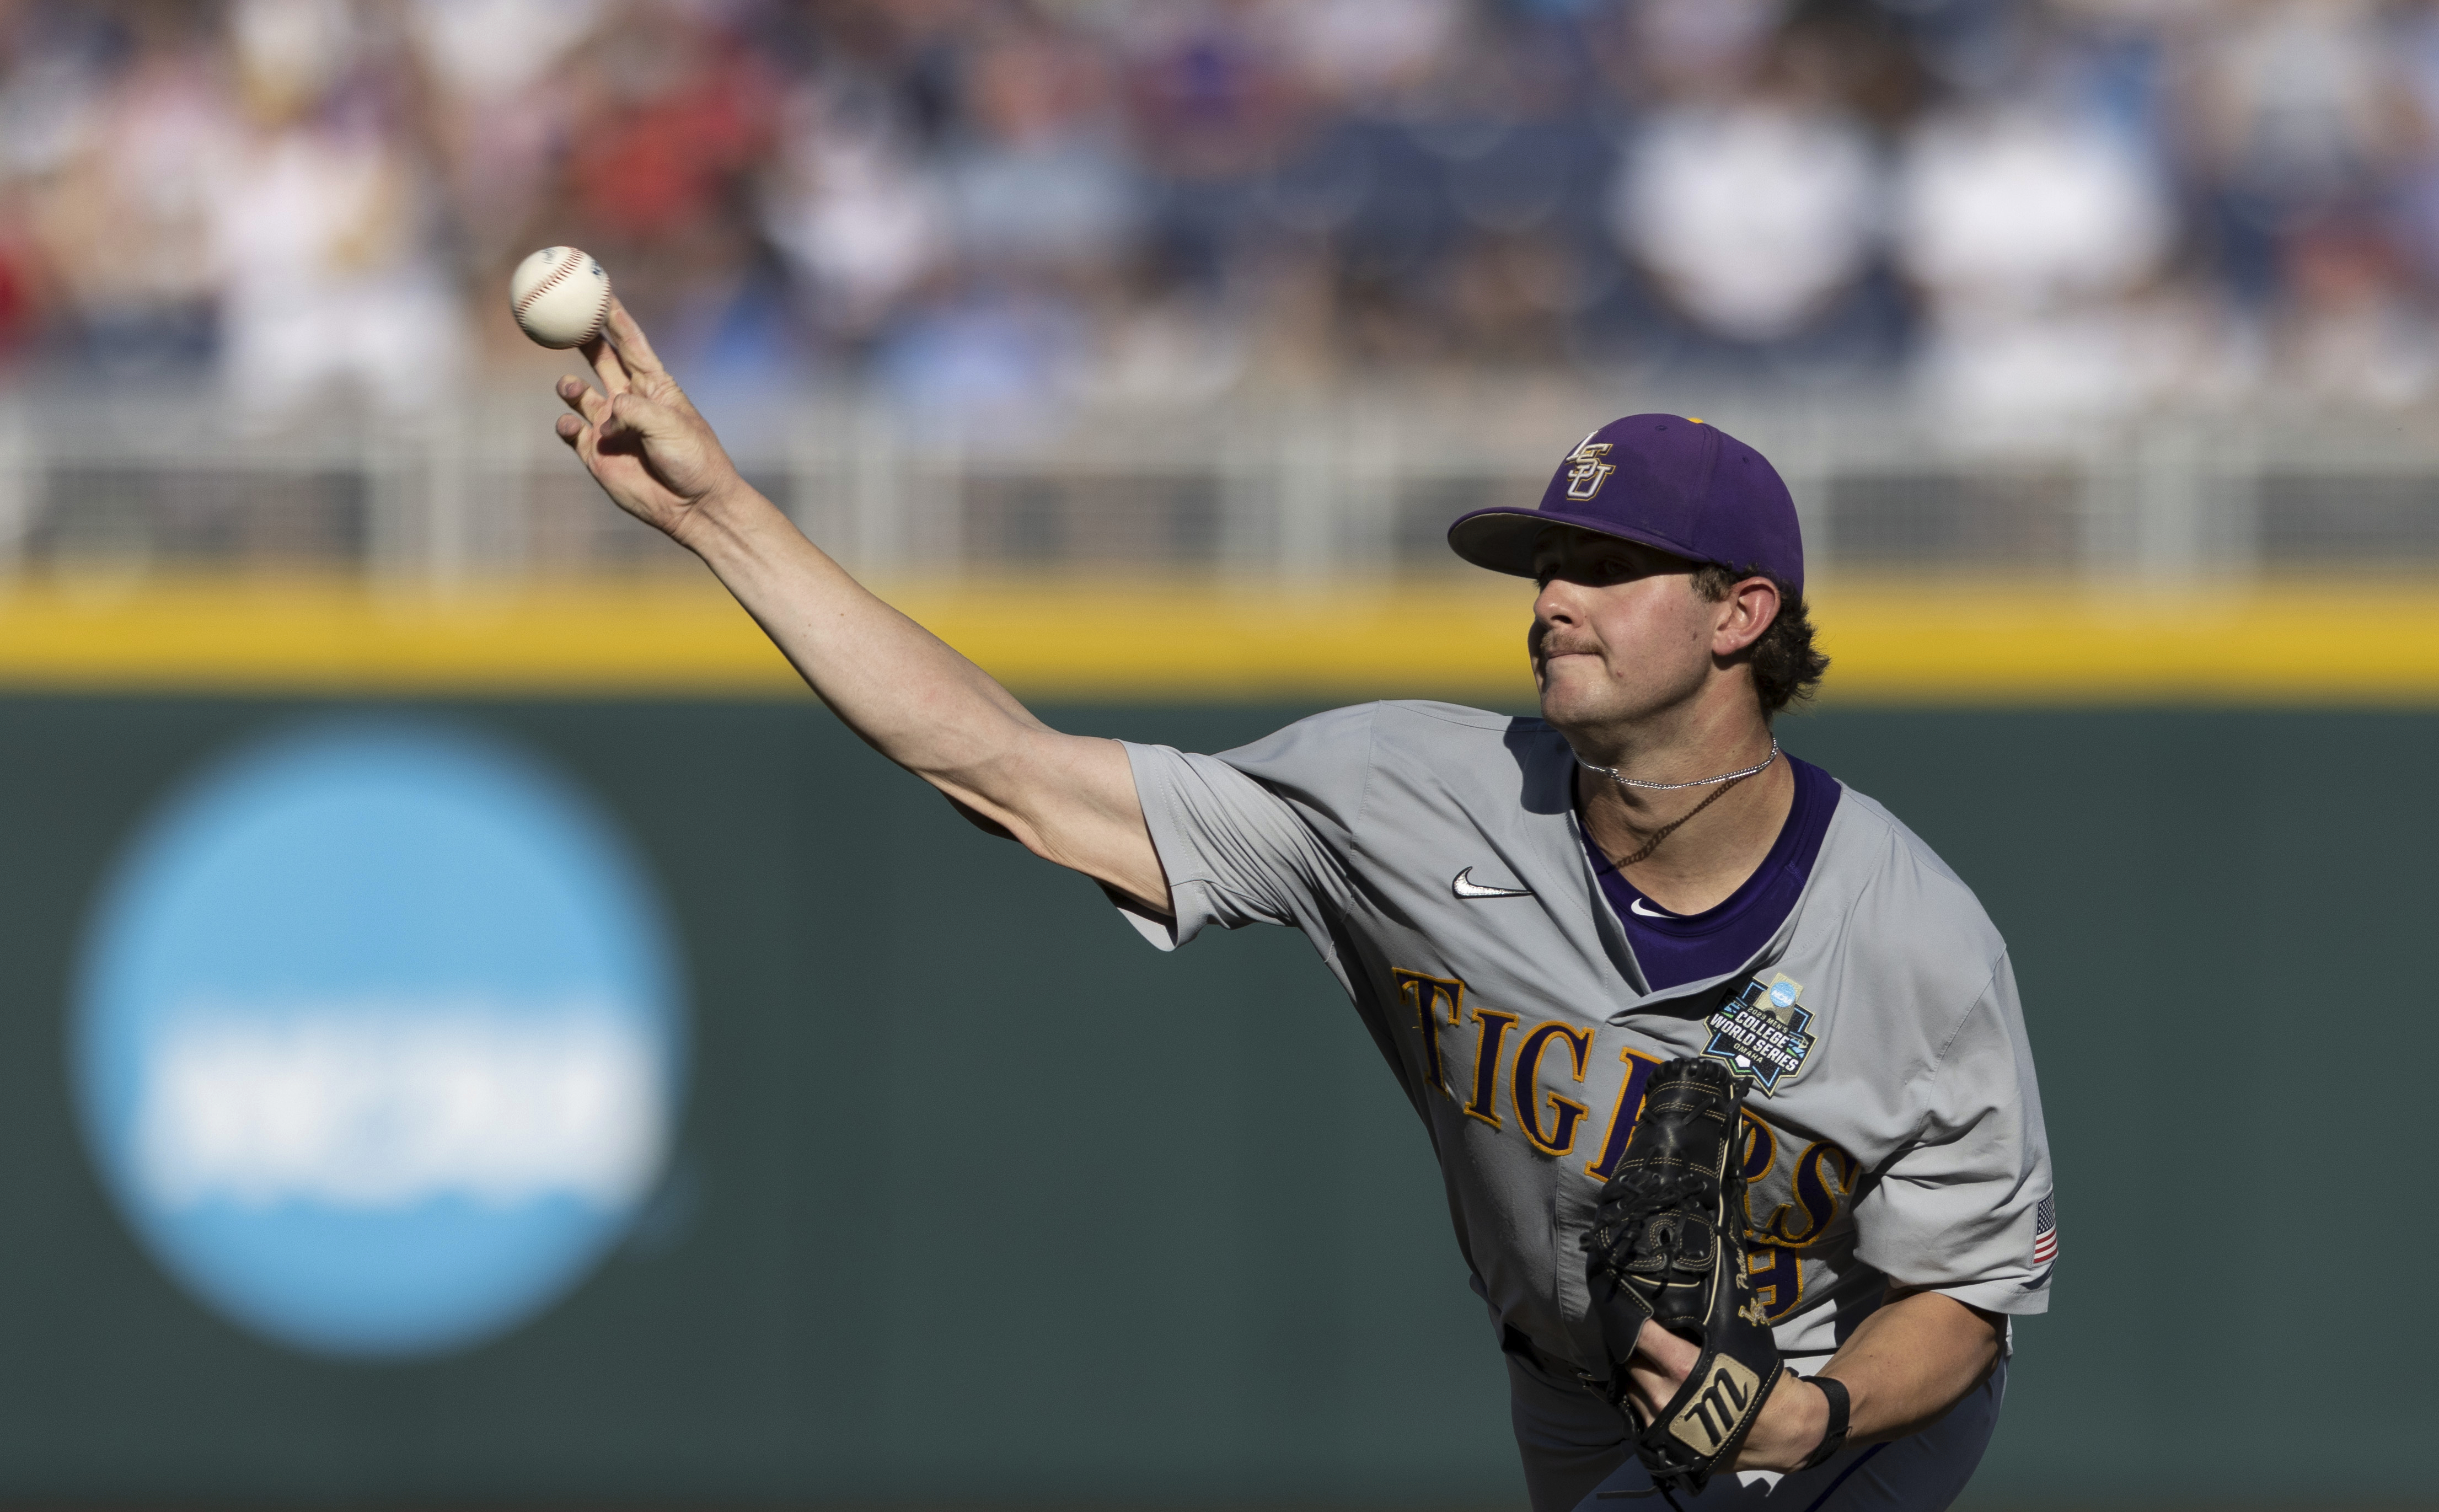 LSU takes down Wake Forest 2-0 in 11 innings